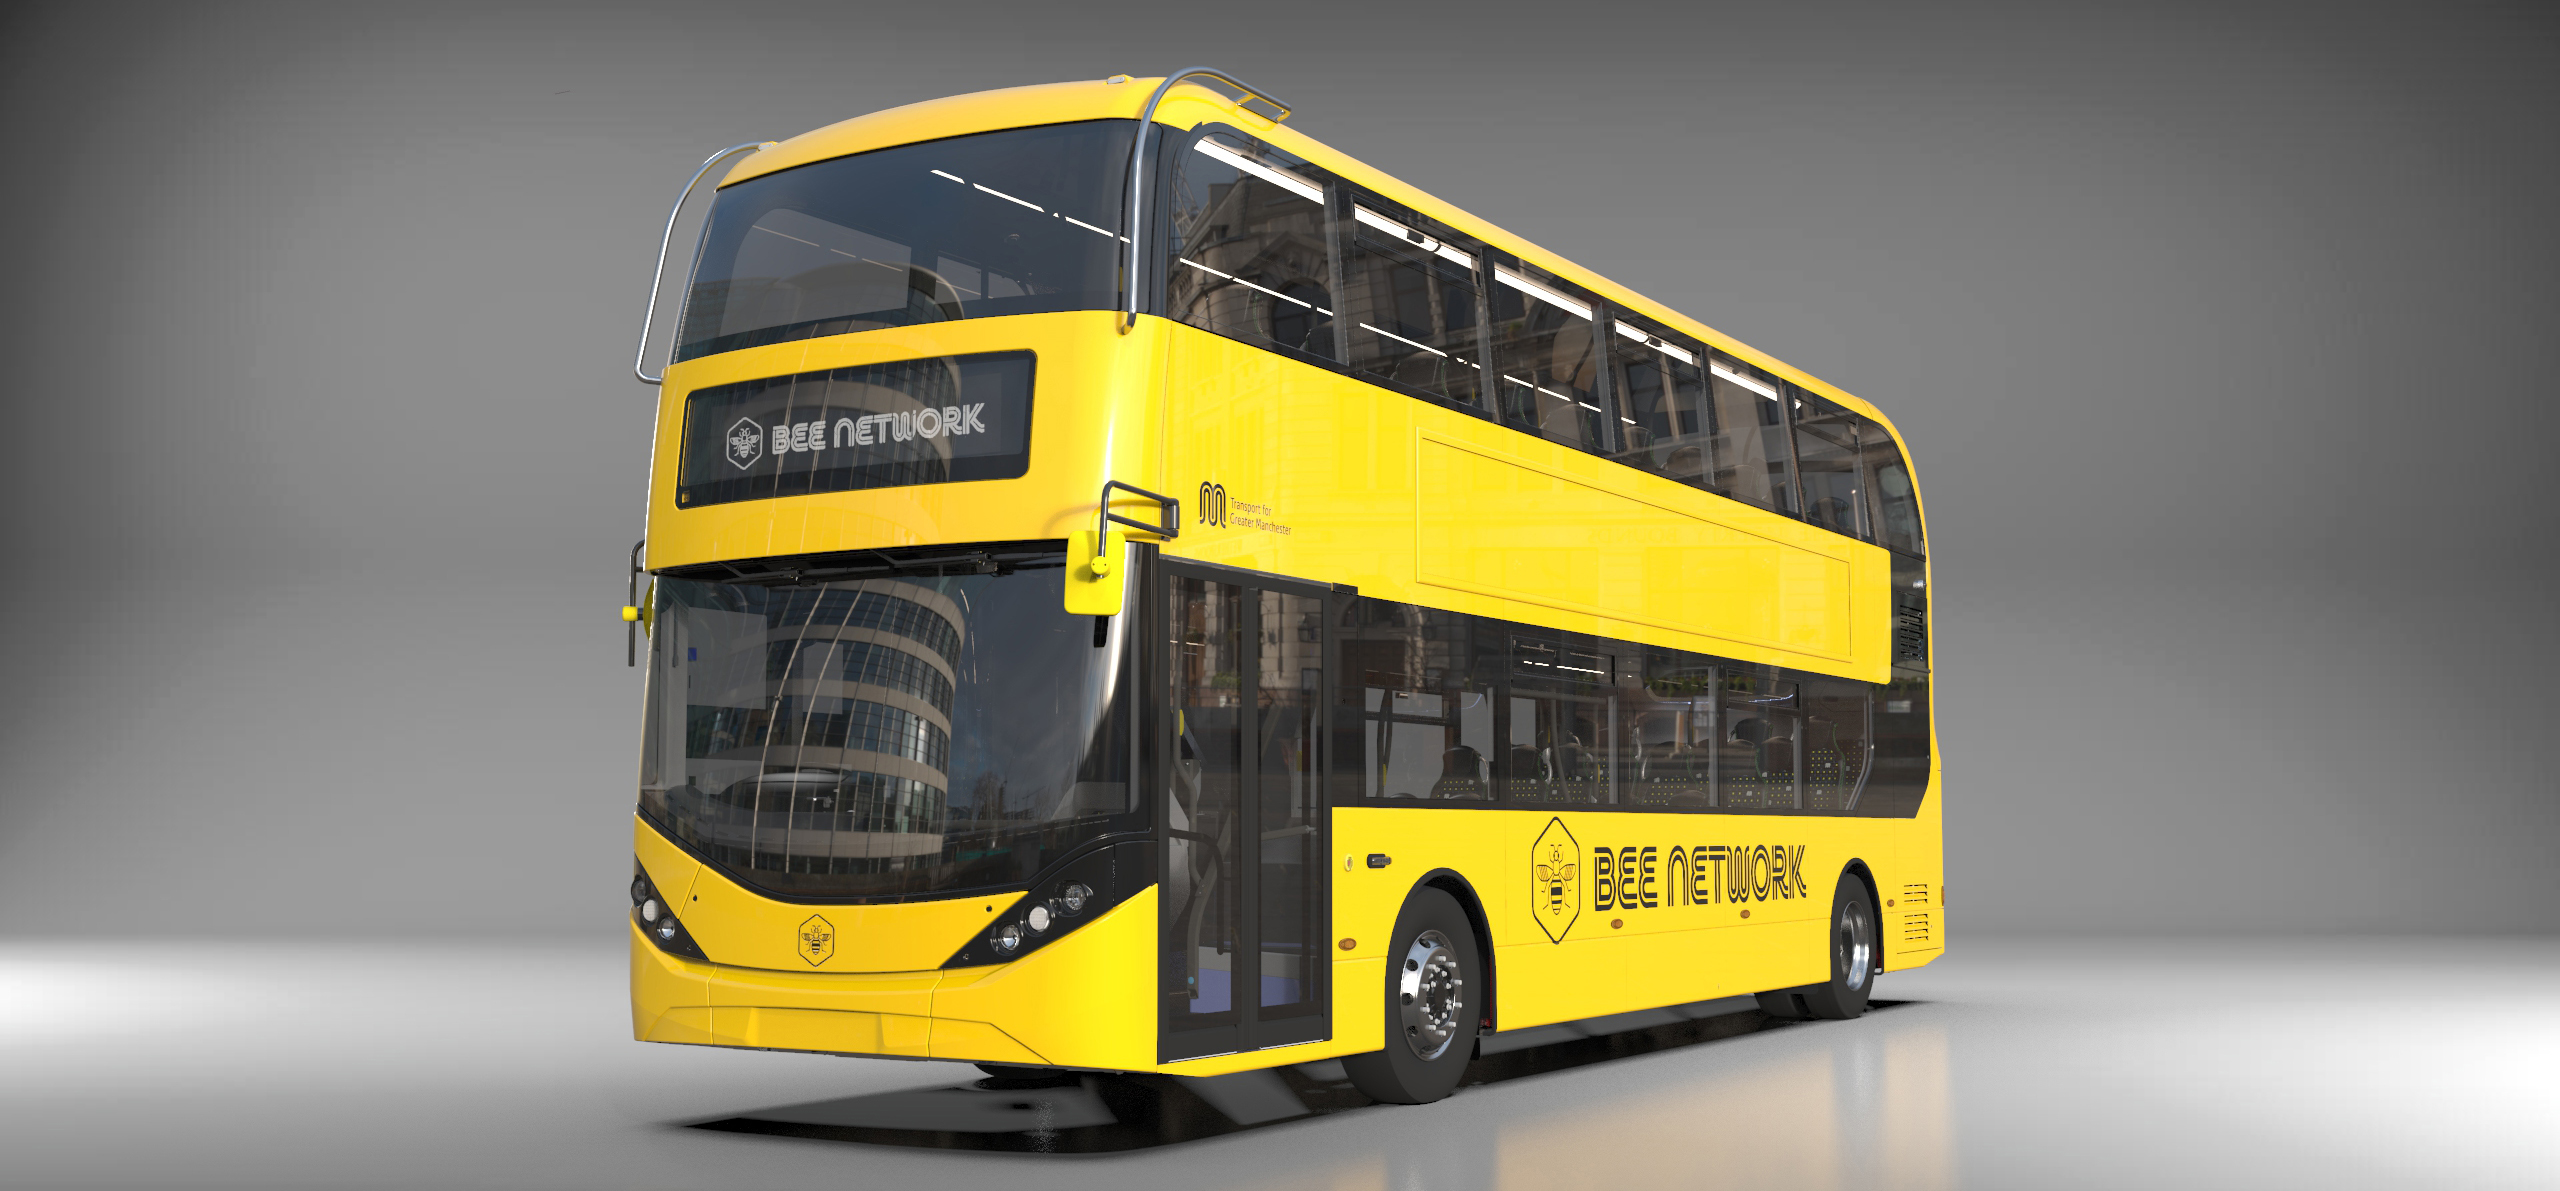 A bus in the new bee network branding